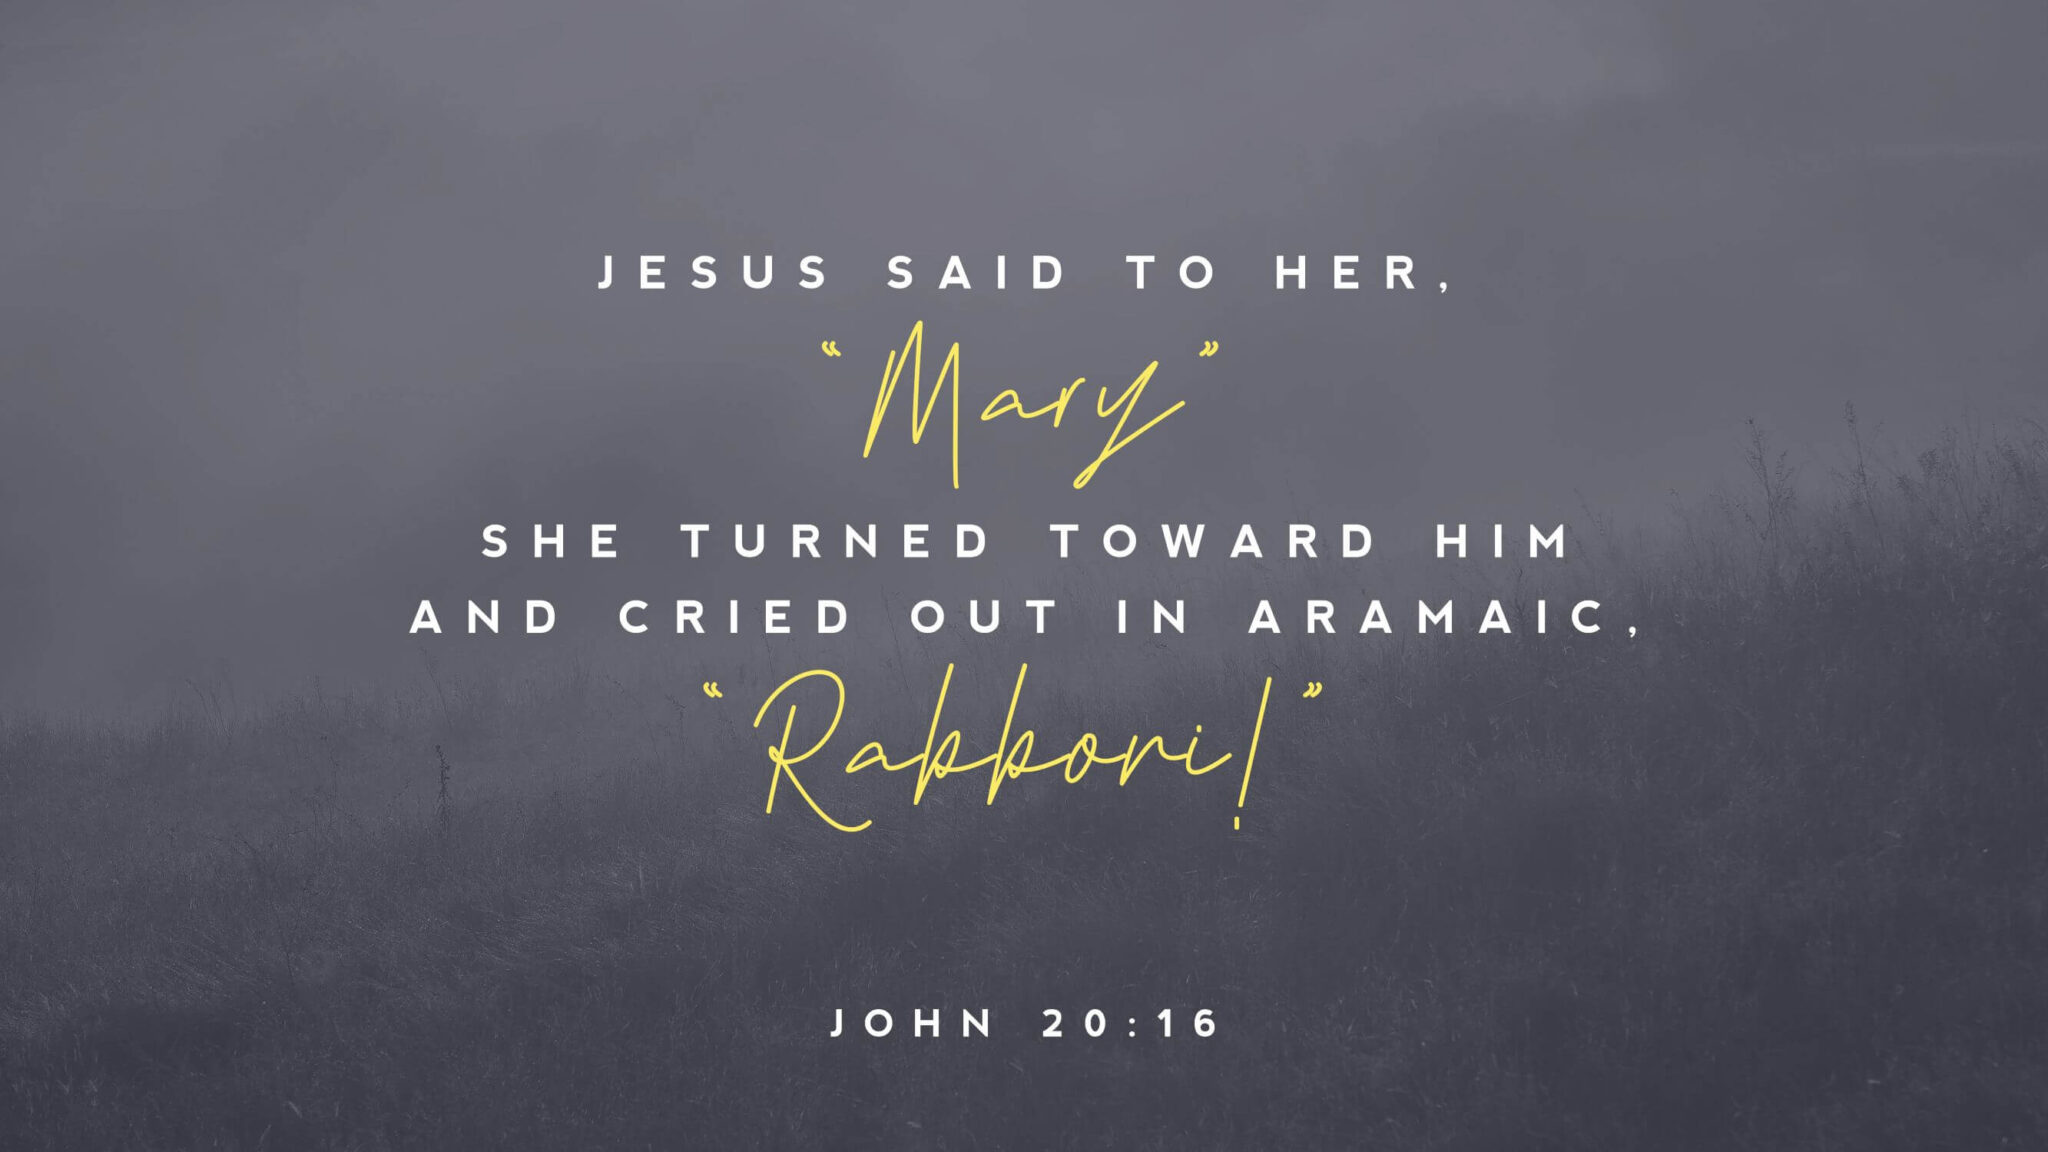 "Jesus said to her, 'Mary' she turned toward him and cried out in aramaic. 'Rabboni!"